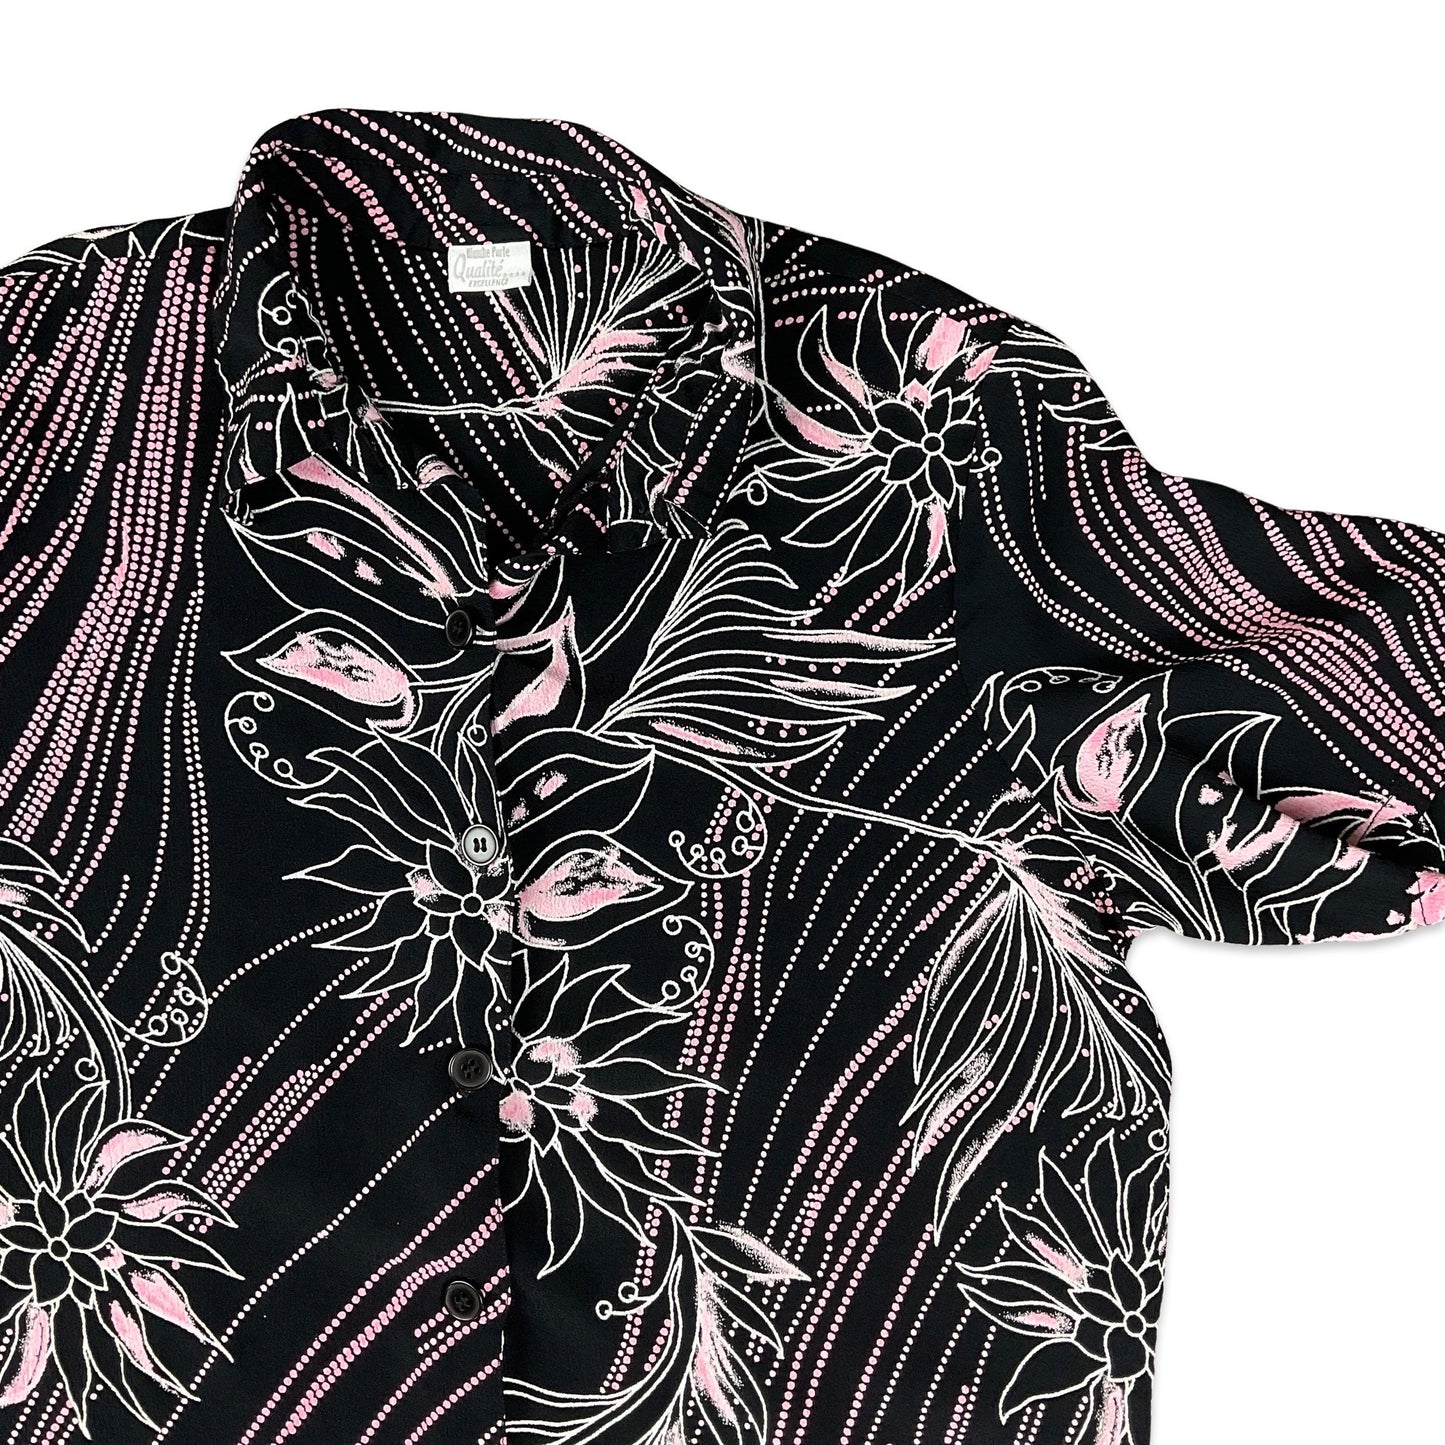 Vintage 80s 90s Black and Pink Abstract Print Shirt Blouse 10 12